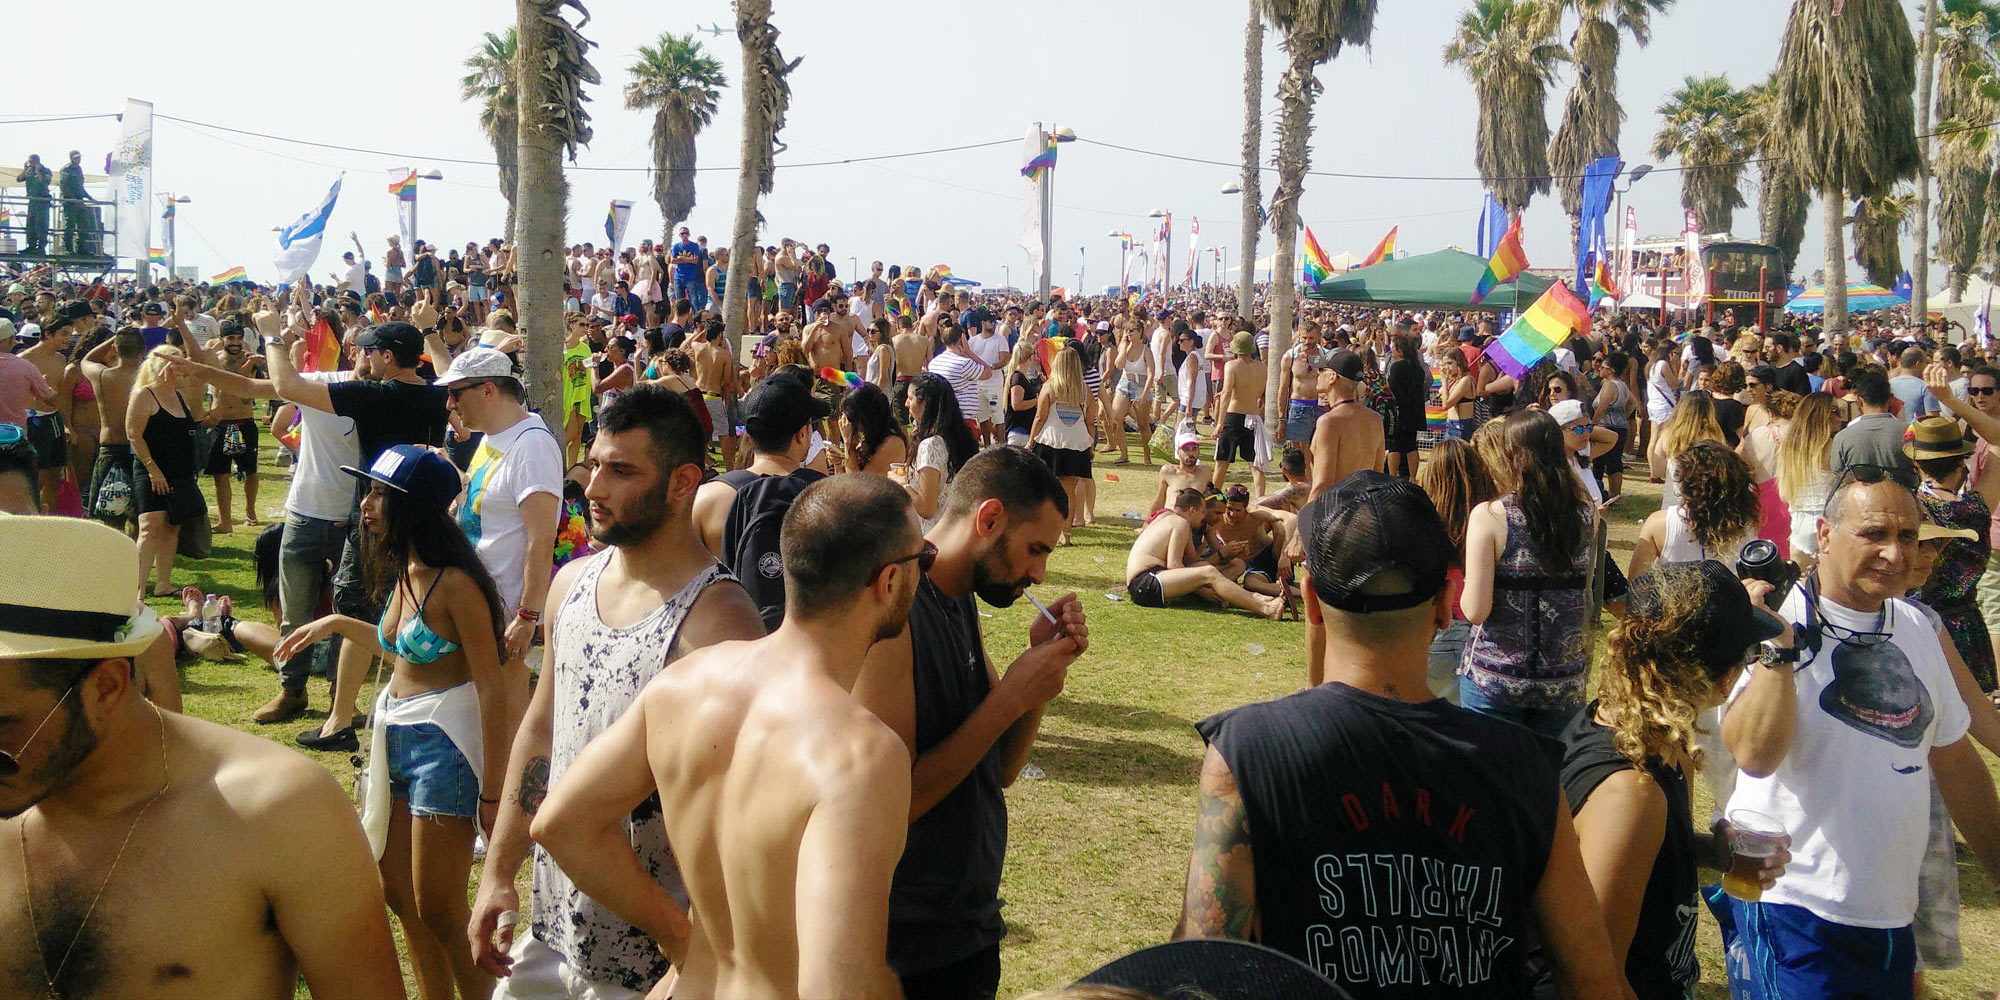 thousands celebrate Tel Aviv Pride at Charles Clore Park, some with bare chest because of the heat